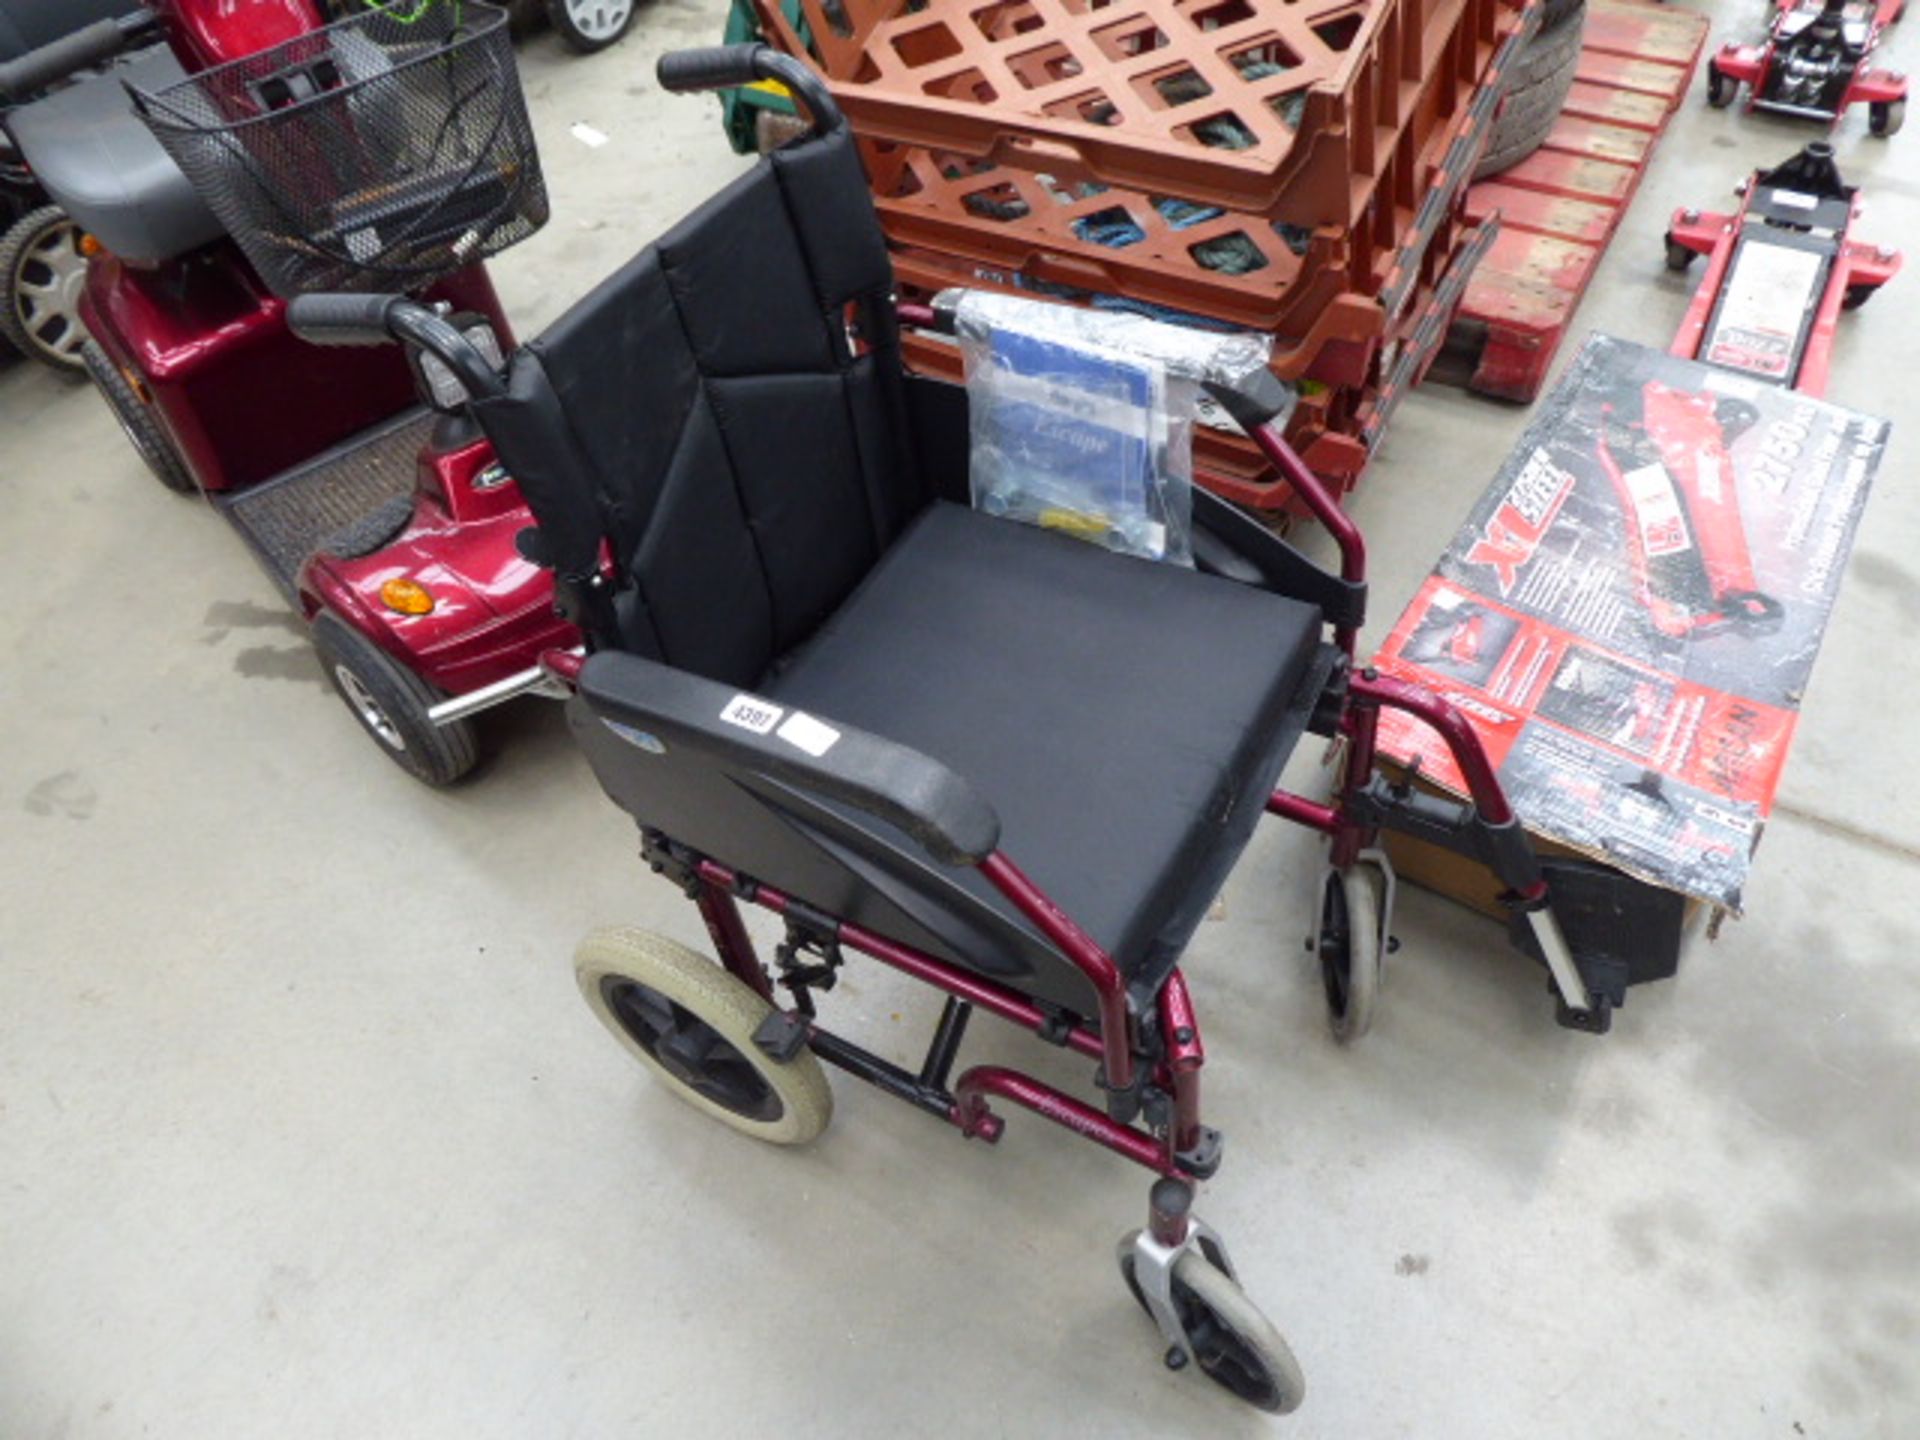 Red Days 'Escape' fold up wheelchair with detachable footrests